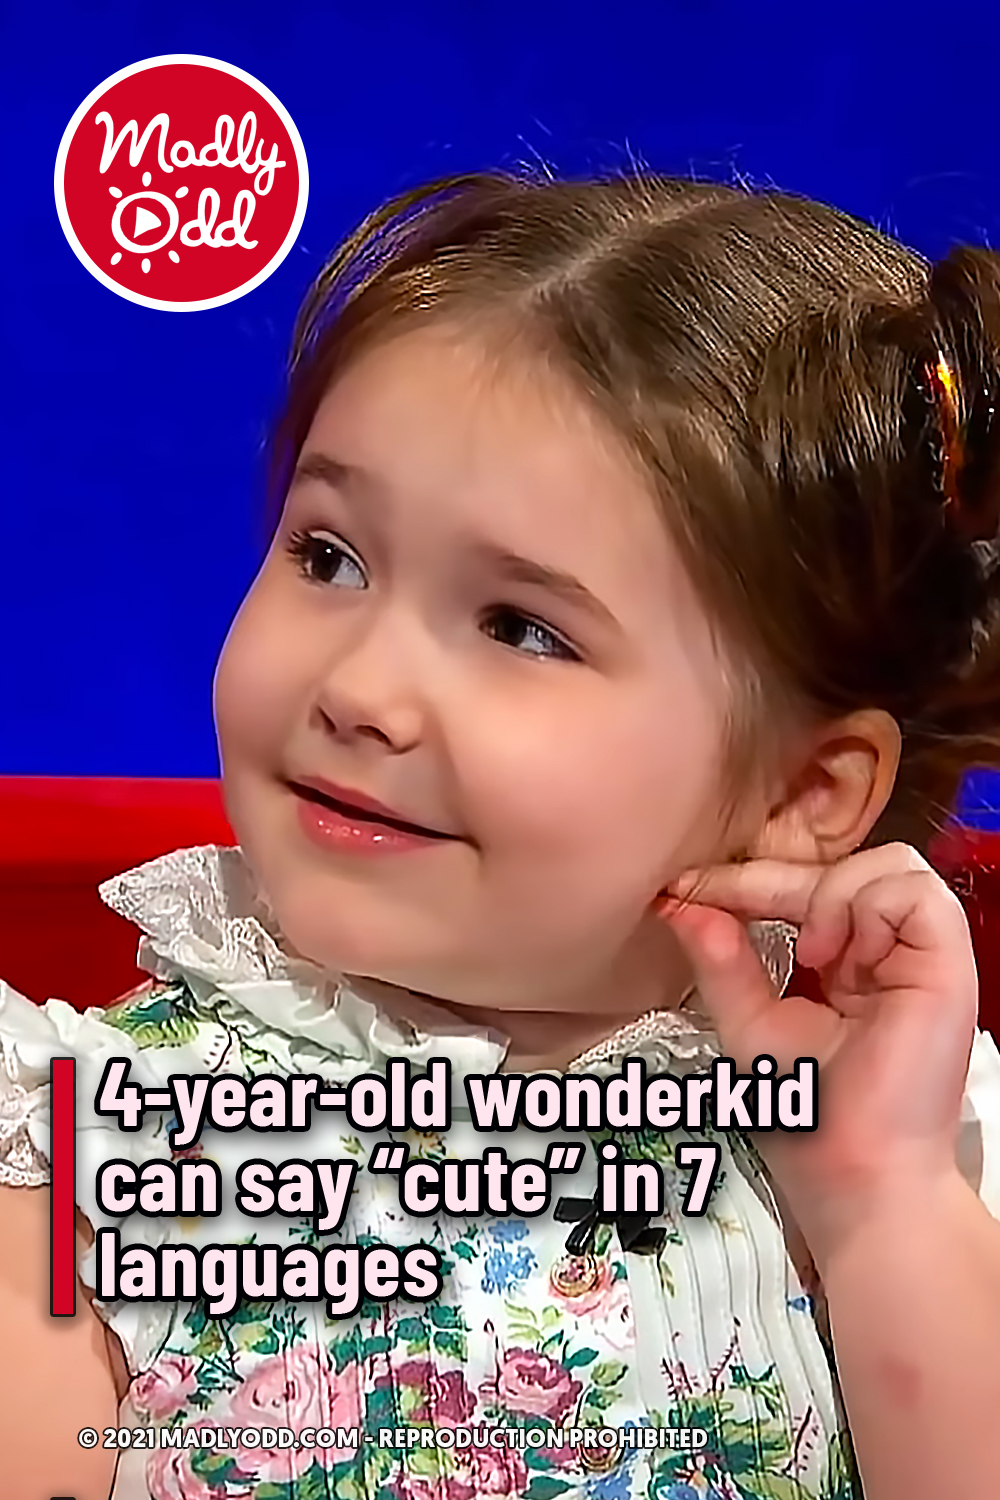 4-year-old wonderkid can say “cute” in 7 languages